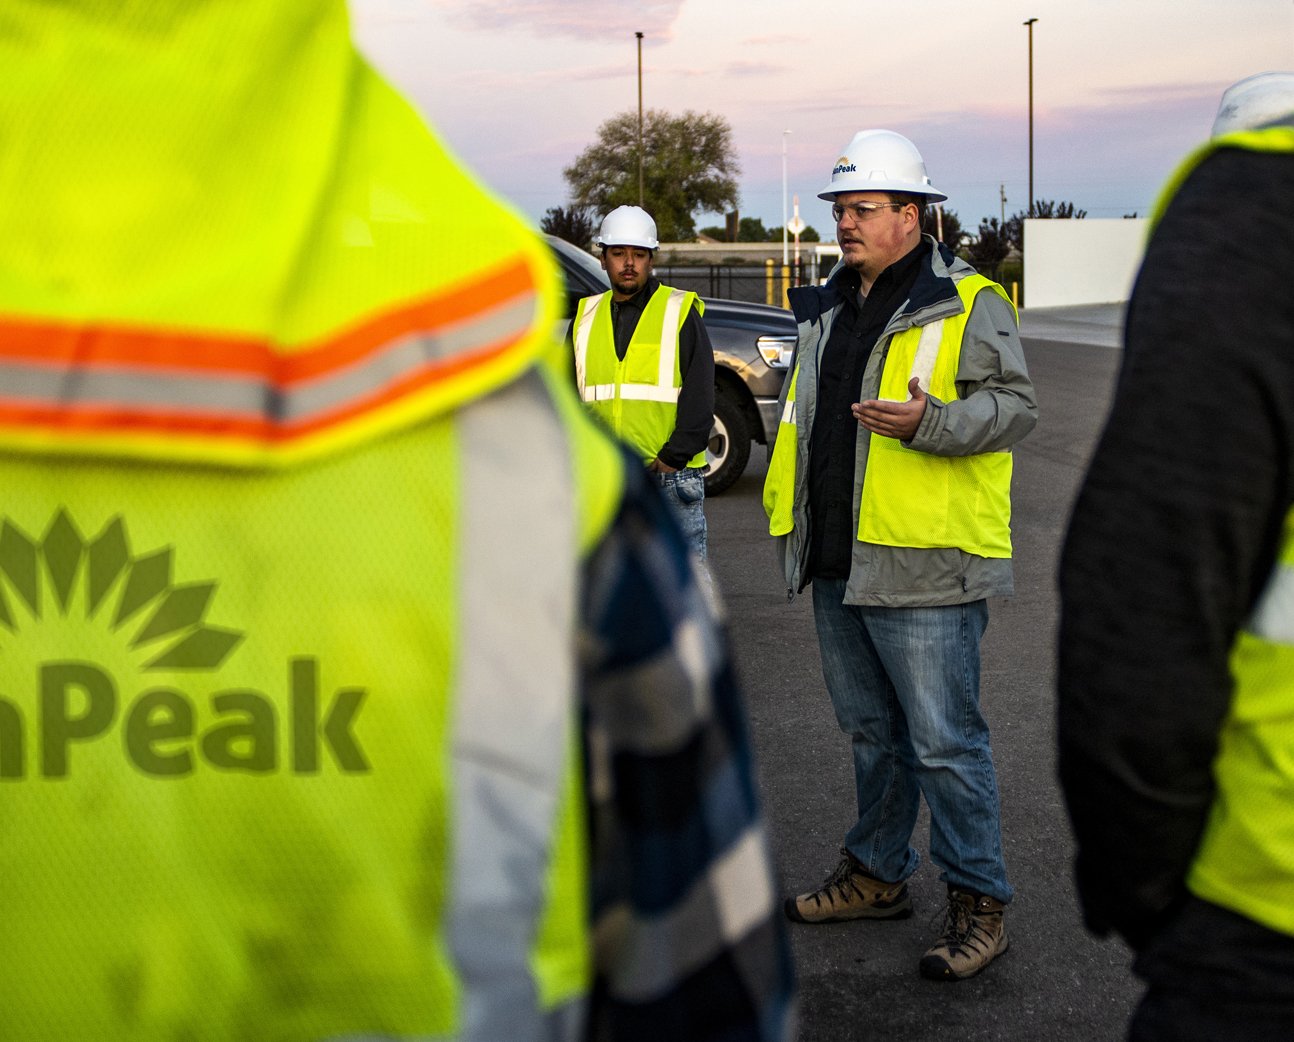 The SunPeak installation team on site, representing SunPeak’s work as a commercial solar installation company. 